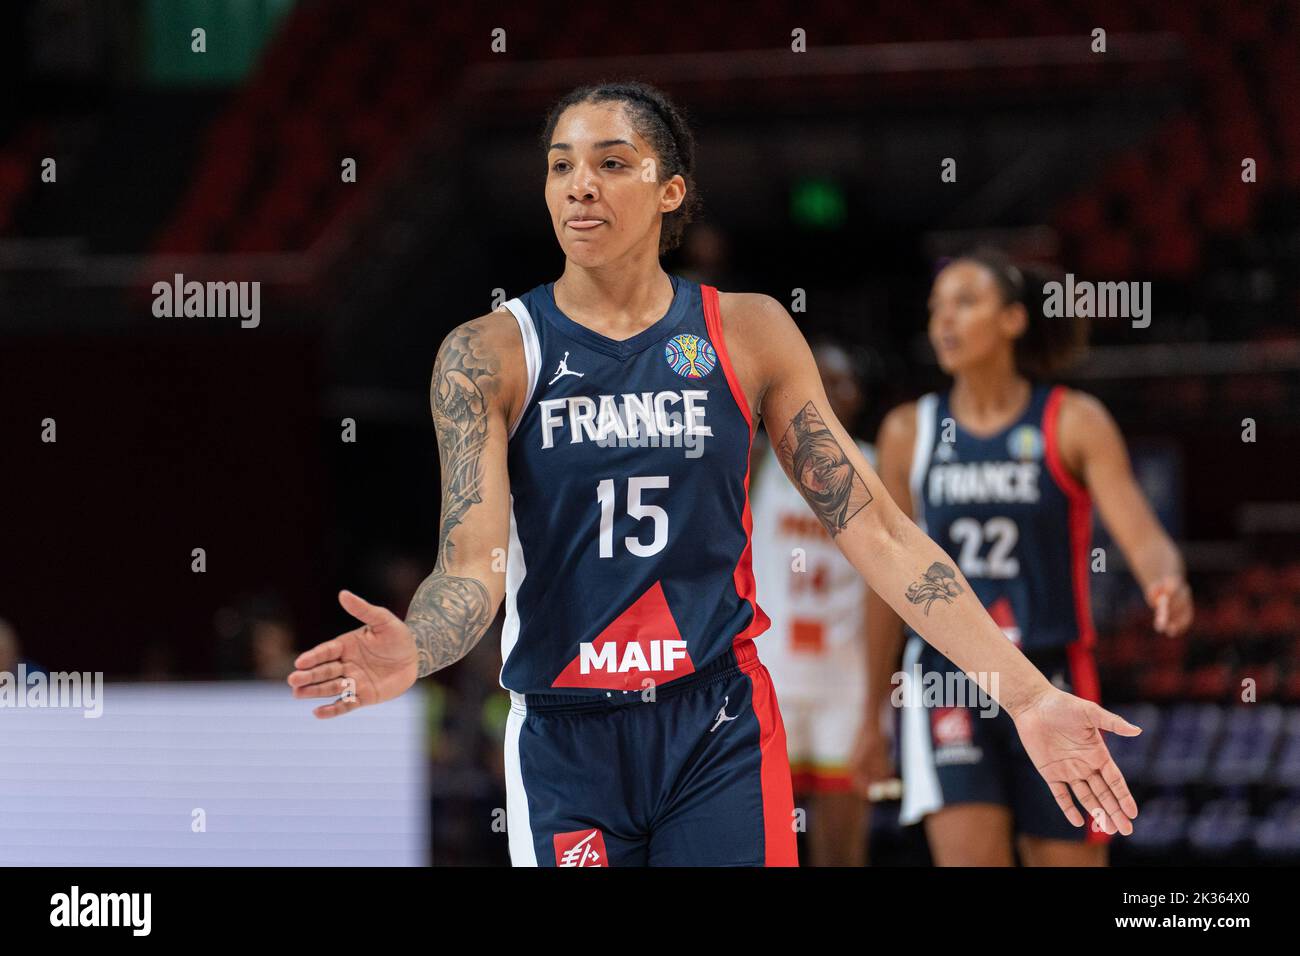 Sydney, Australia. 25th Sep, 2022. Gabby Williams (15 France) laments a miss during the FIBA Womens World Cup 2022 game between Mali and France at the Sydney Superdome in Sydney, Australia. (Foto: Noe Llamas/Sports Press Photo/C - ONE HOUR DEADLINE - ONLY ACTIVATE FTP IF IMAGES LESS THAN ONE HOUR OLD - Alamy) Credit: SPP Sport Press Photo. /Alamy Live News Stock Photo